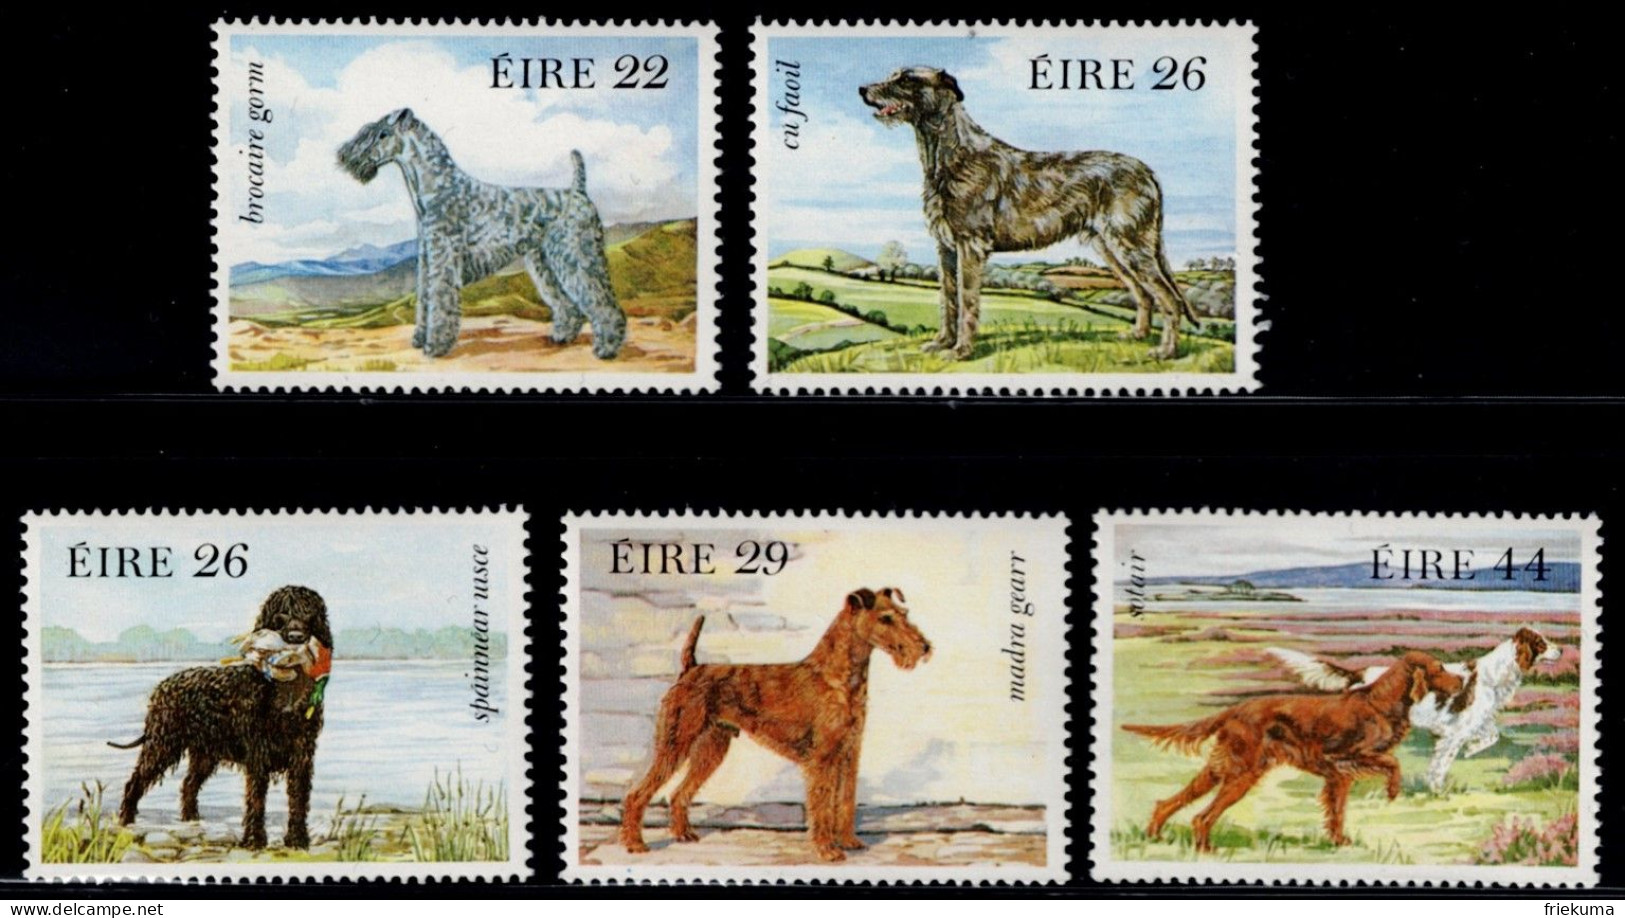 Éire 1983, Dogs: Kerry Blue Terrier, Irish Wolfhound, Irish Water Spaniel, Irish Terrier, Irish Setter, MiNr. 510-514 - Dogs